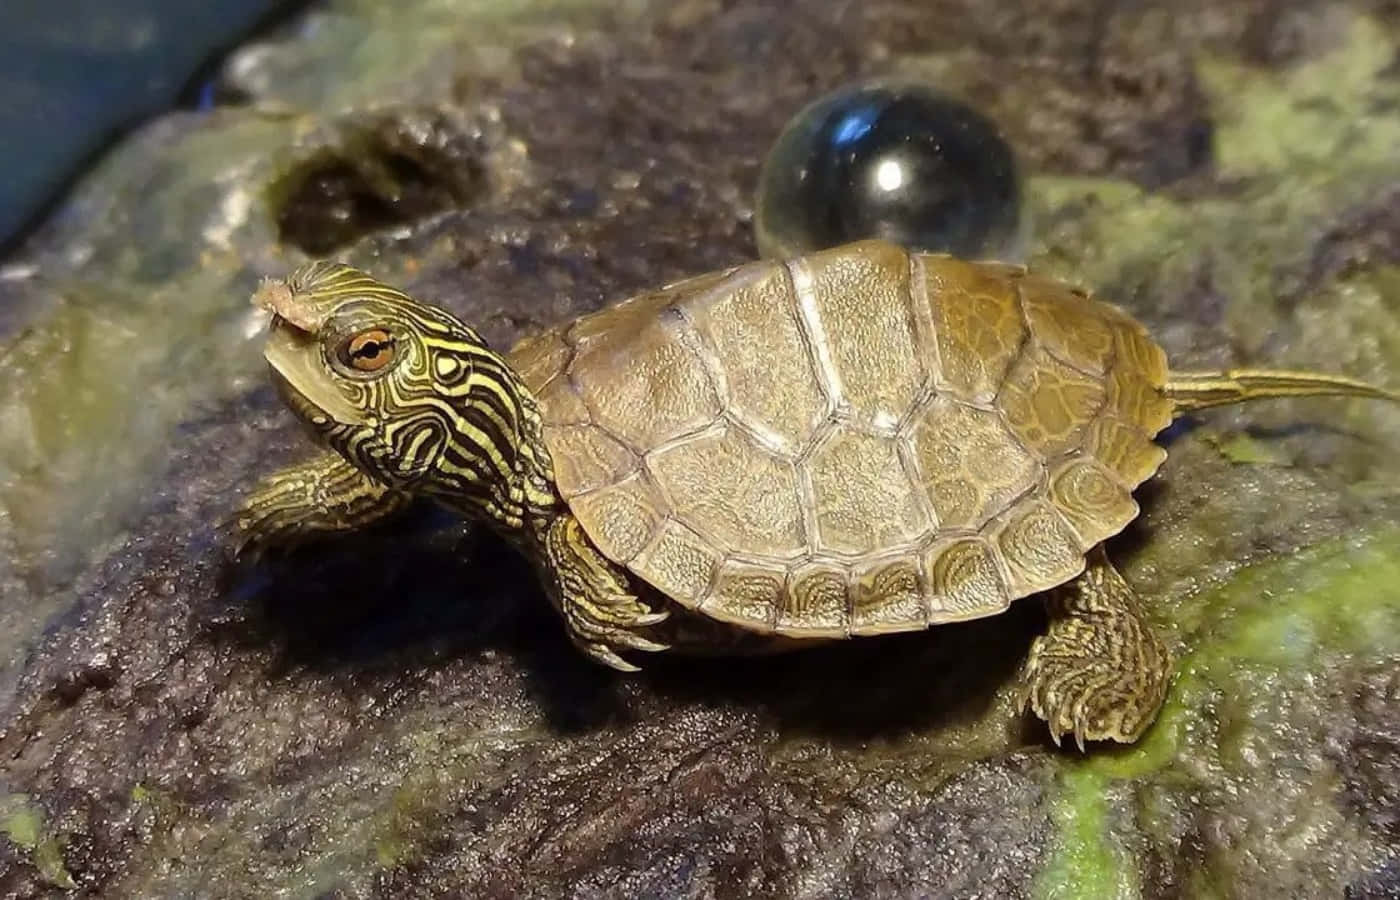 An adorable turtle to light up your day